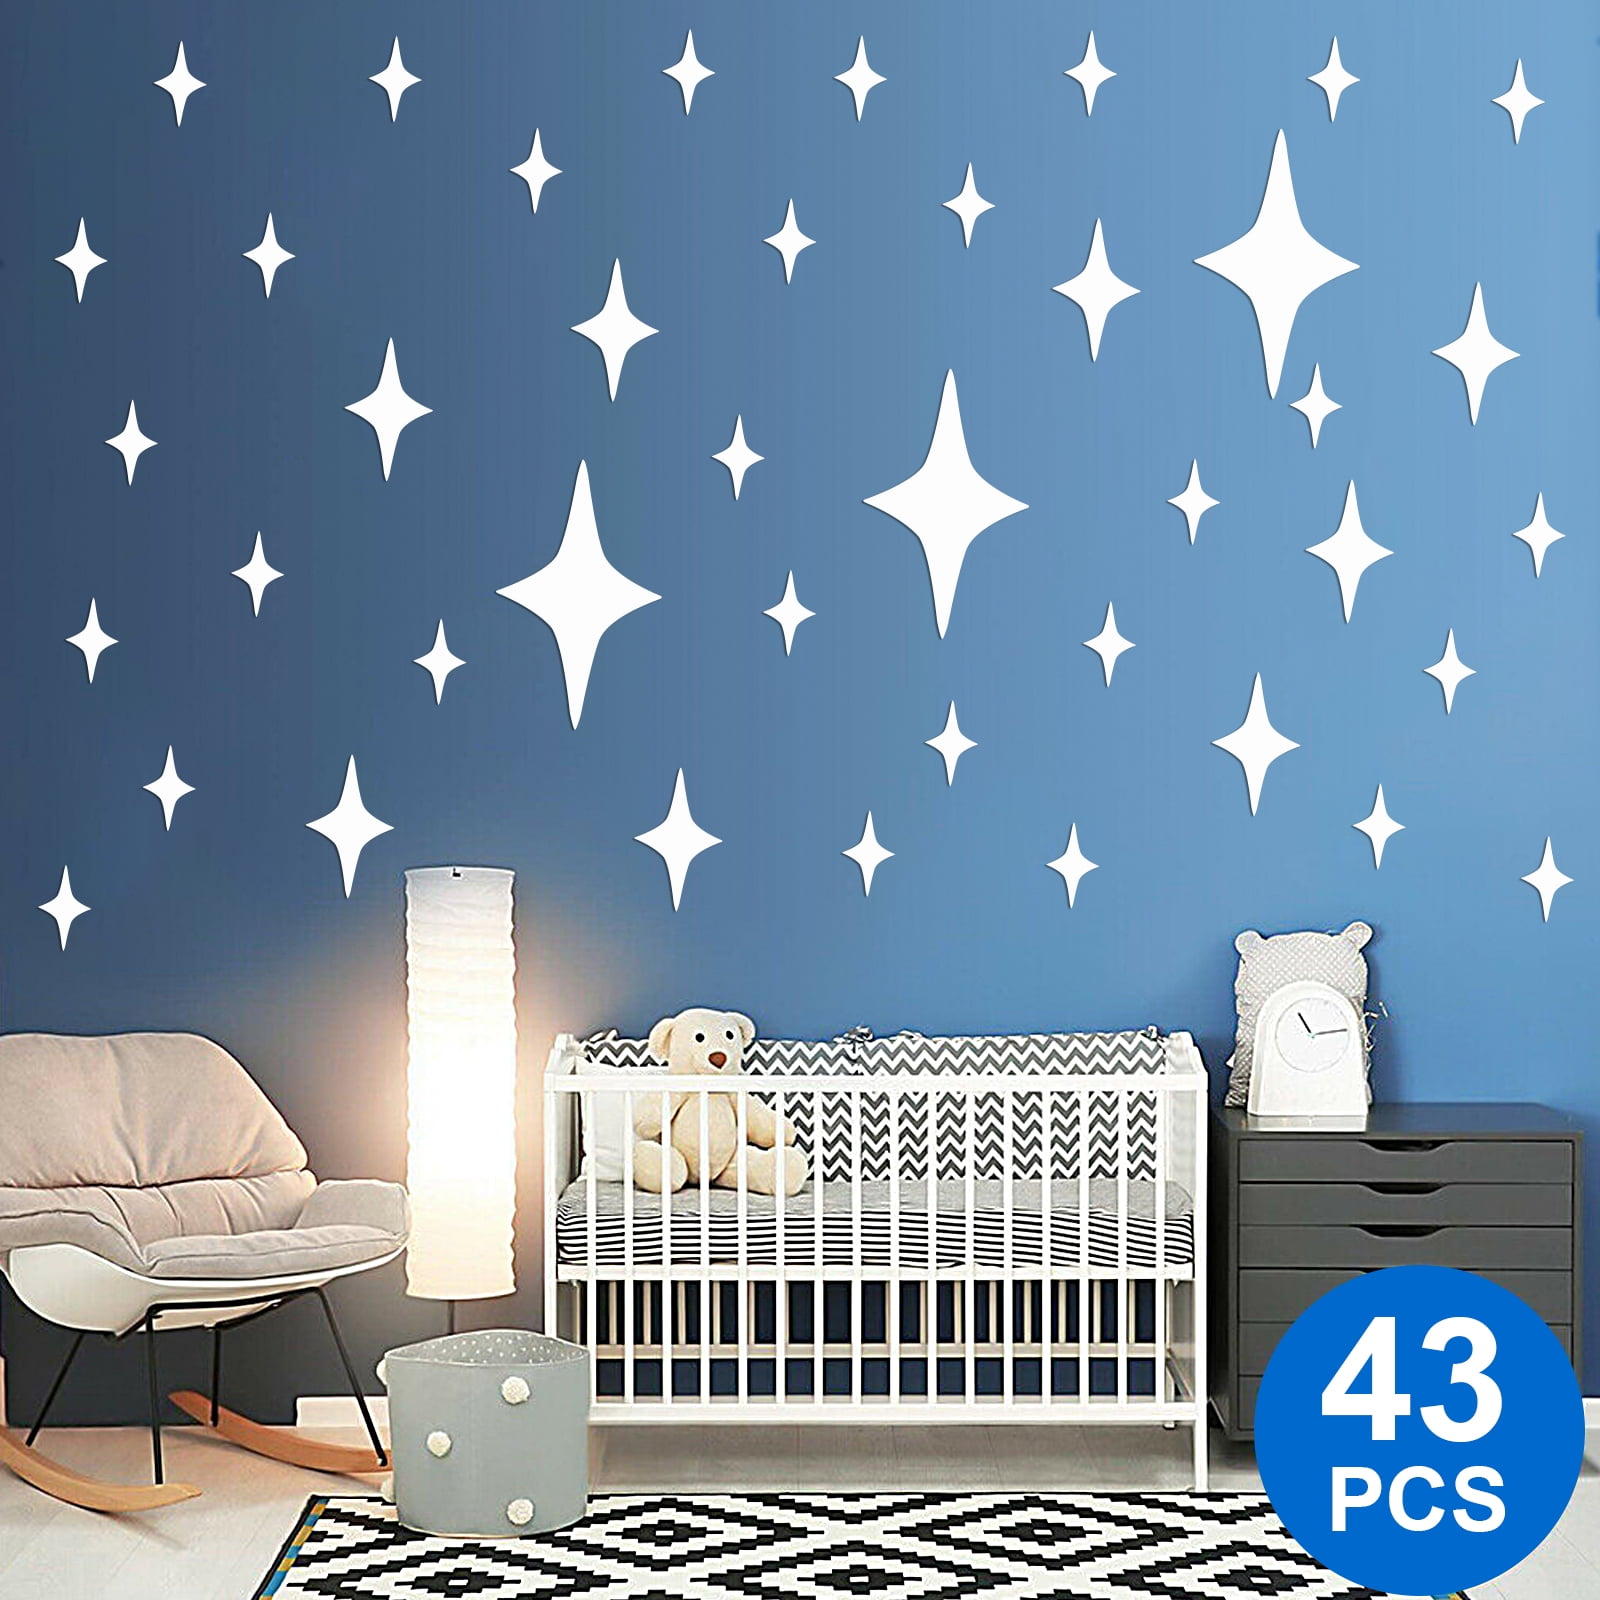  216 Pieces Moon Stars Wall 3D Stickers Acrylic Mirror Wall  Decals Decor Silver Removable for Kids Bedding Room Ceiling Wall Decoration  : Tools & Home Improvement